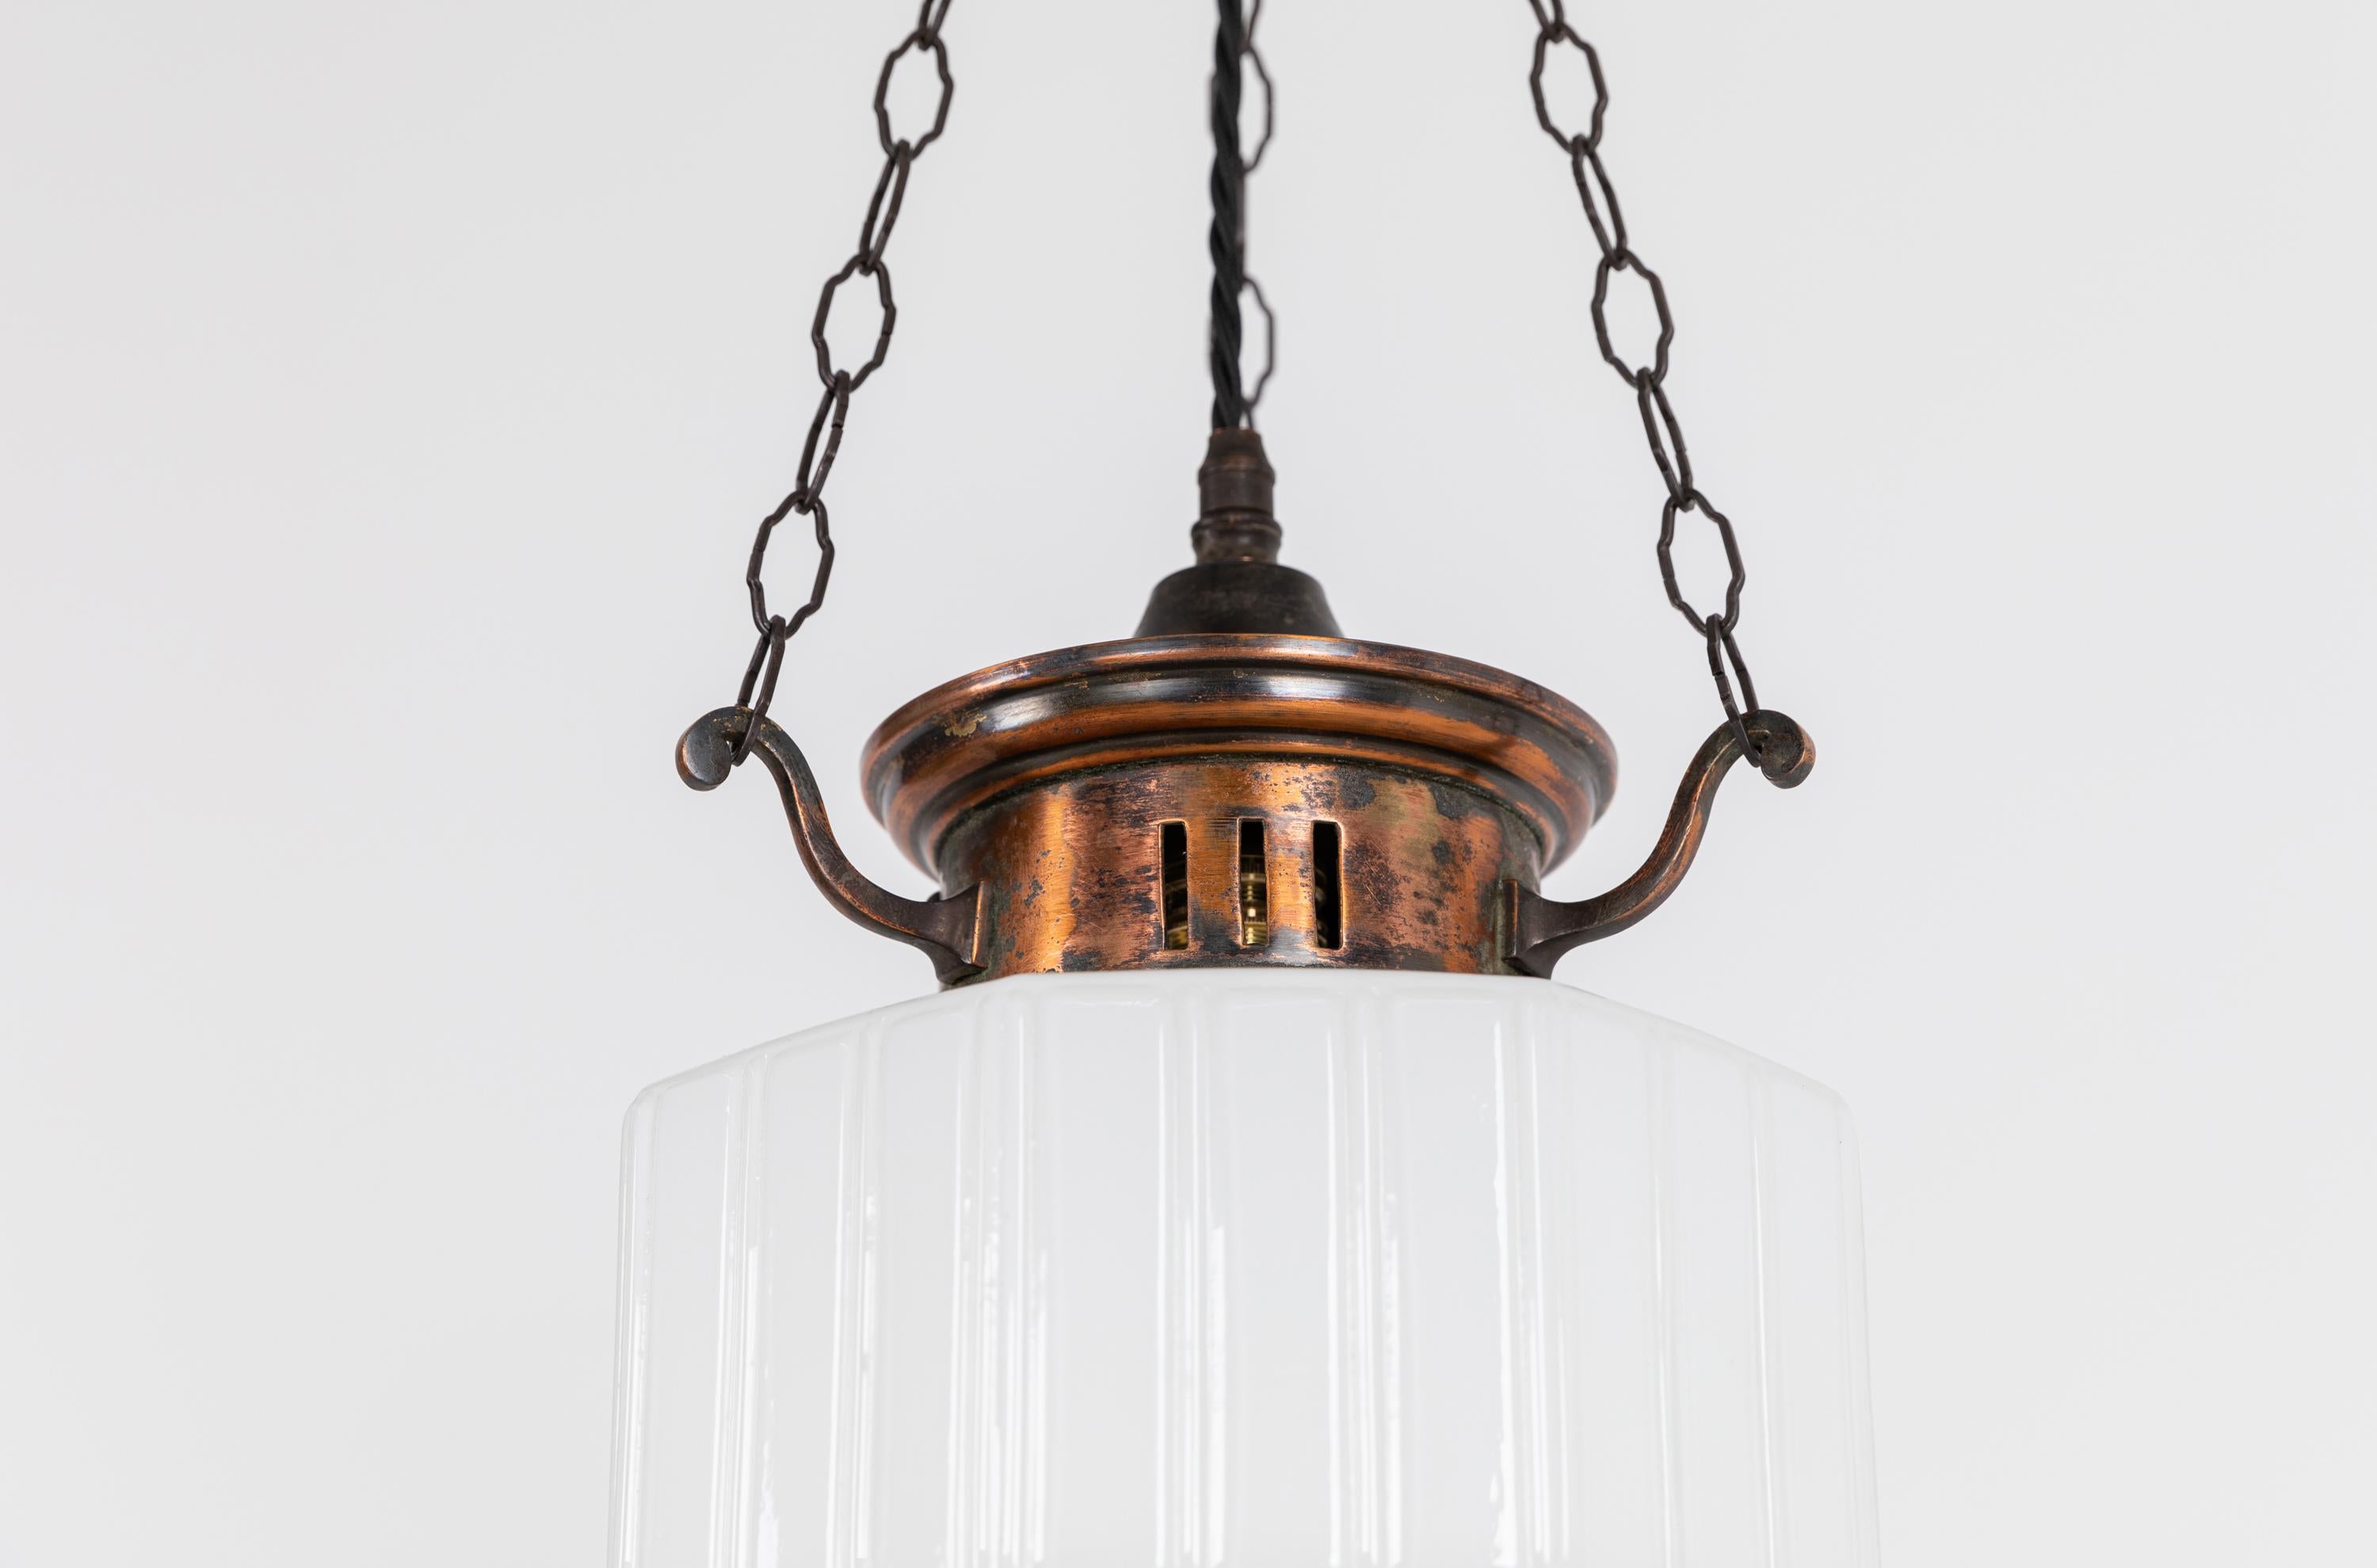 English Art Deco Hexagonal Opaline Glass Pendant Lamp with Copper Gallery, C.1920 For Sale